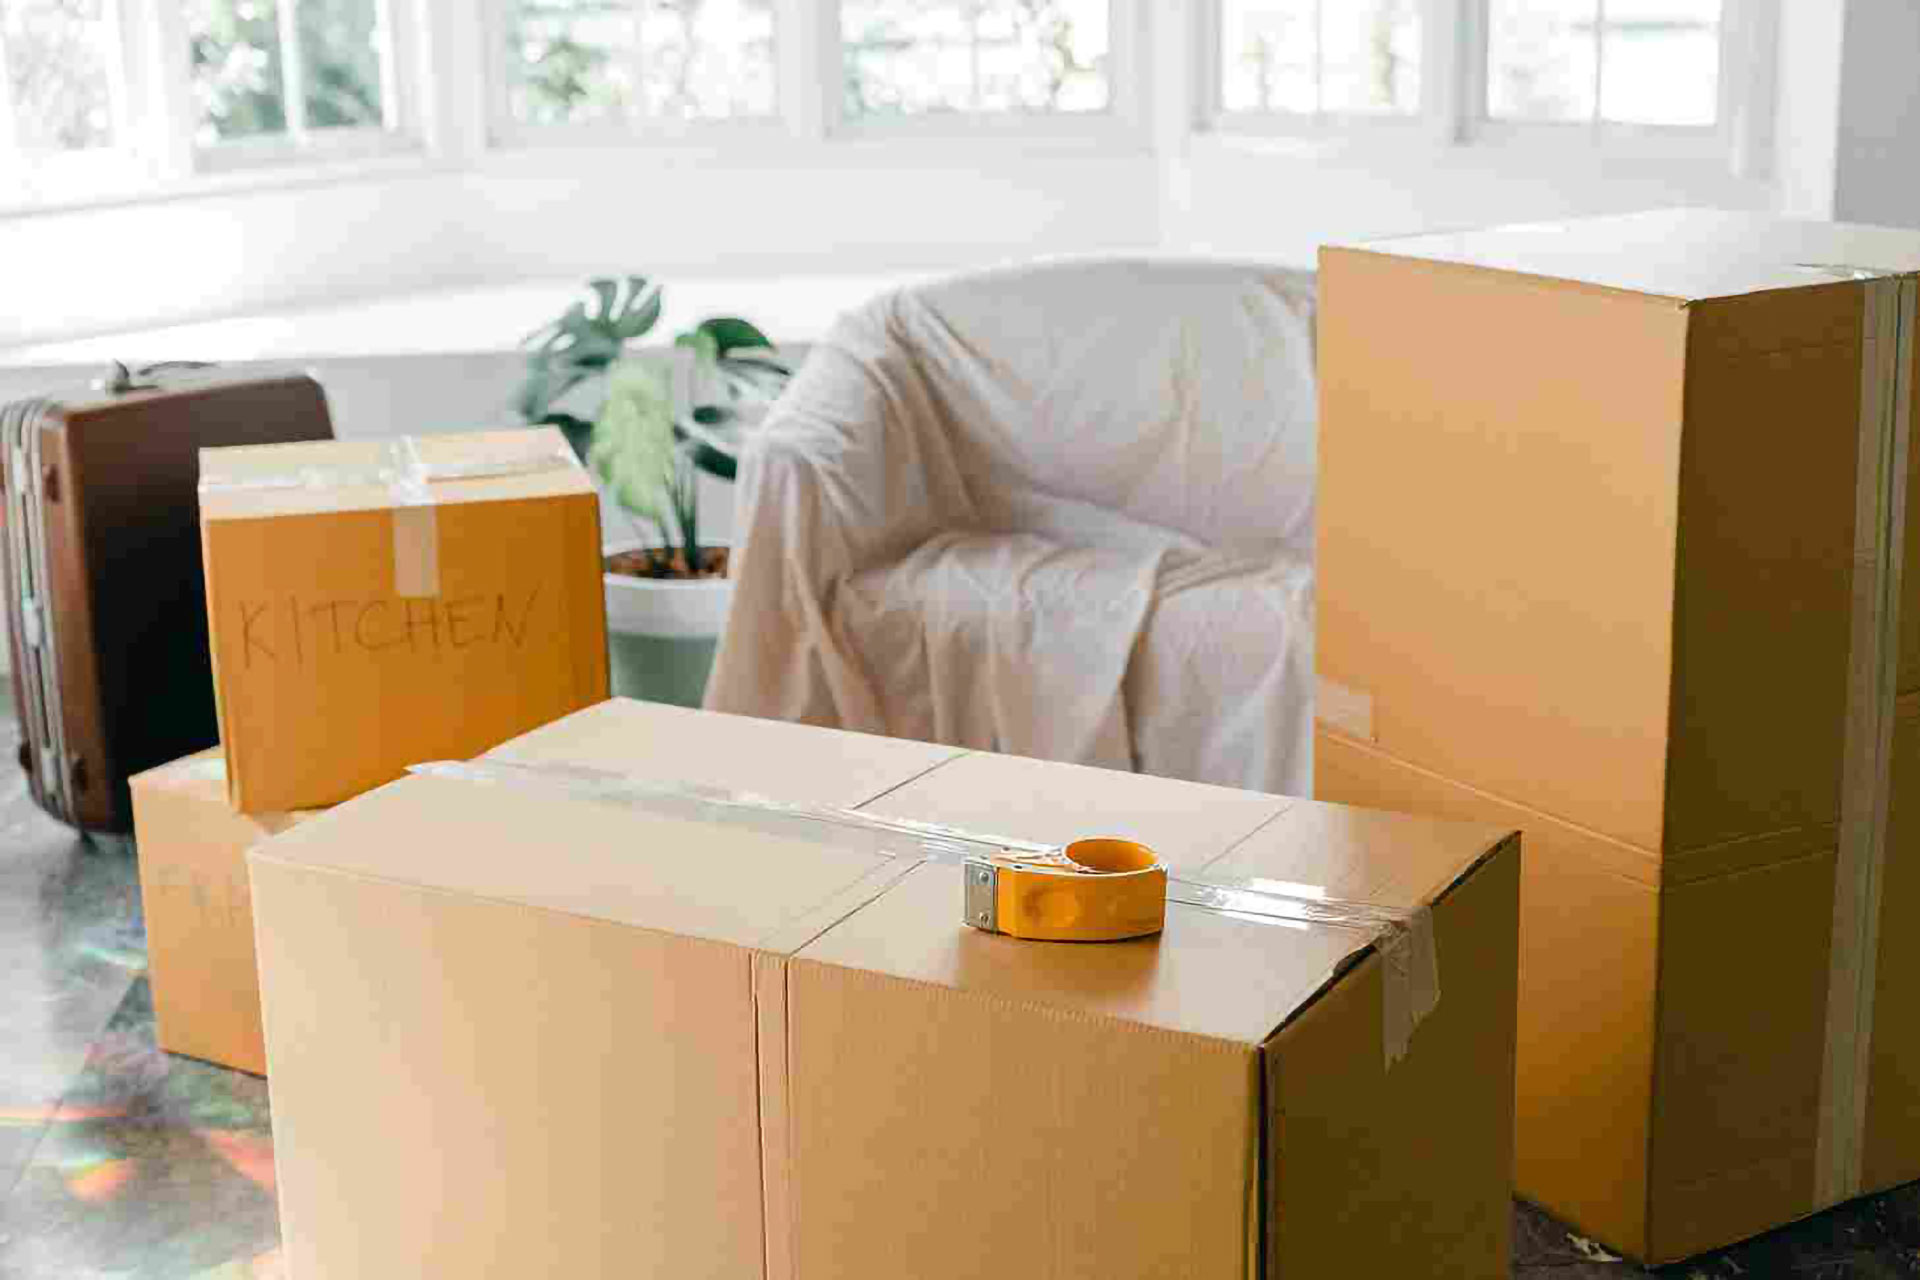 How to recycle your packaging materials after moving house